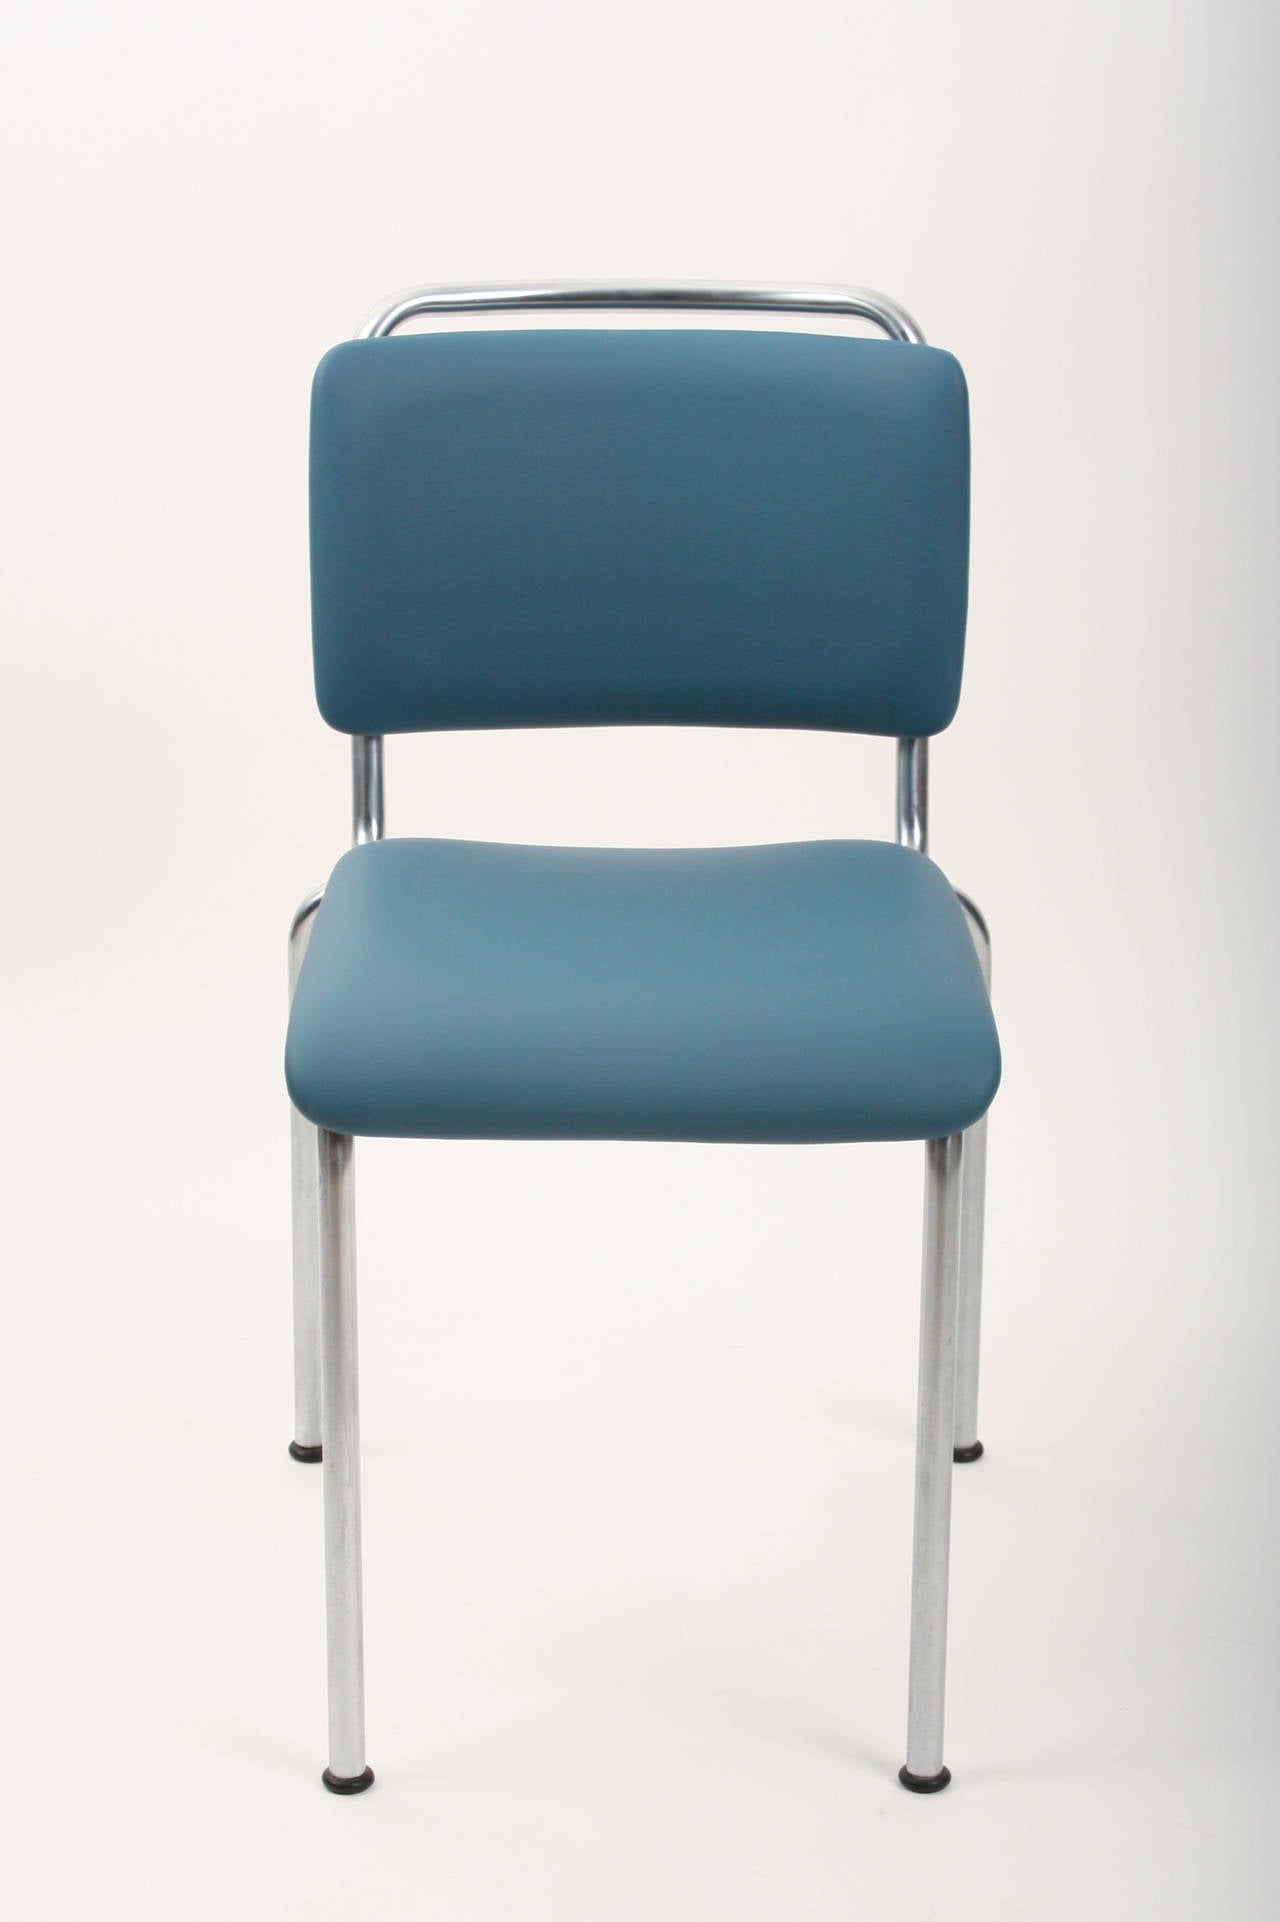 Gispen University chairs. A set of eight Industrial chairs of Dutch designable 